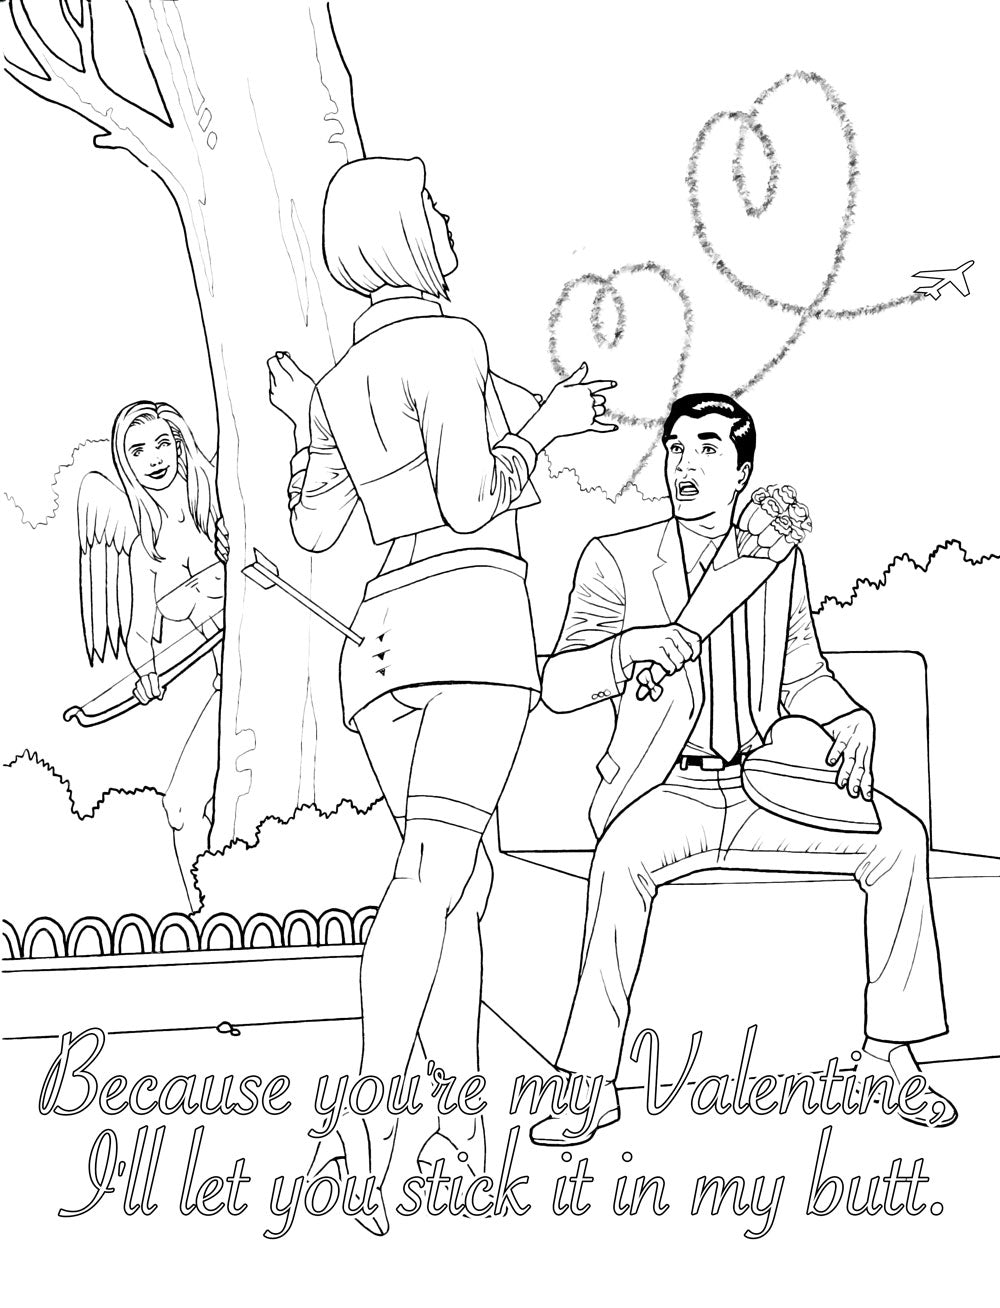 My Naughty Valentine Colouring Book - Just for you desires